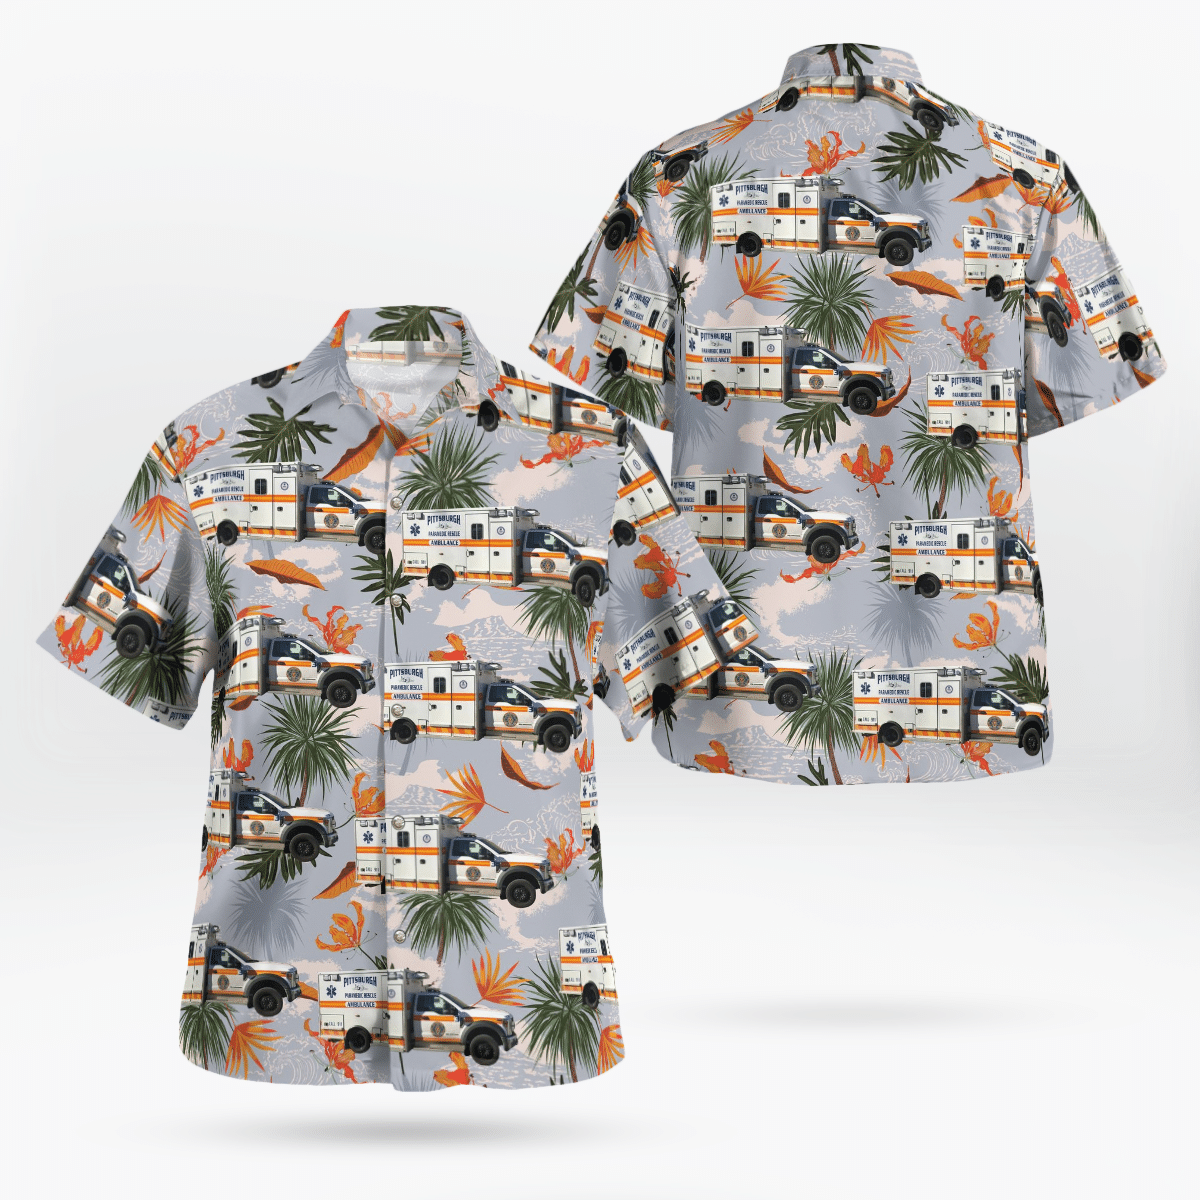 Top Hawaiian shirts are perfect for hot and humid days 179